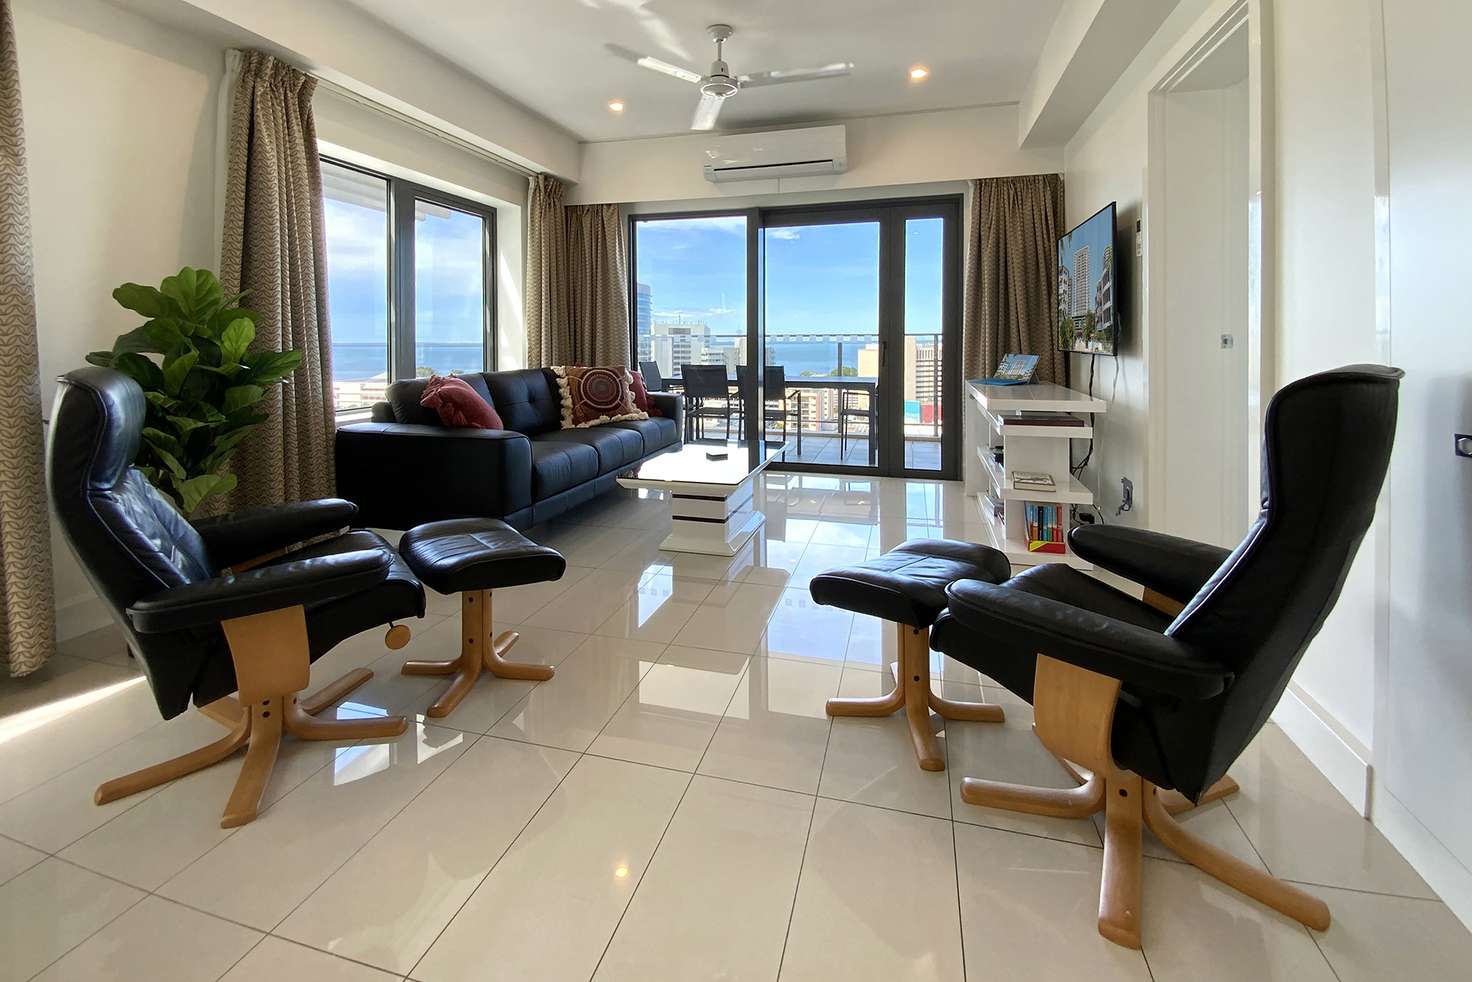 Main view of Homely apartment listing, Unit 1602/31 Woods St, Darwin City NT 800